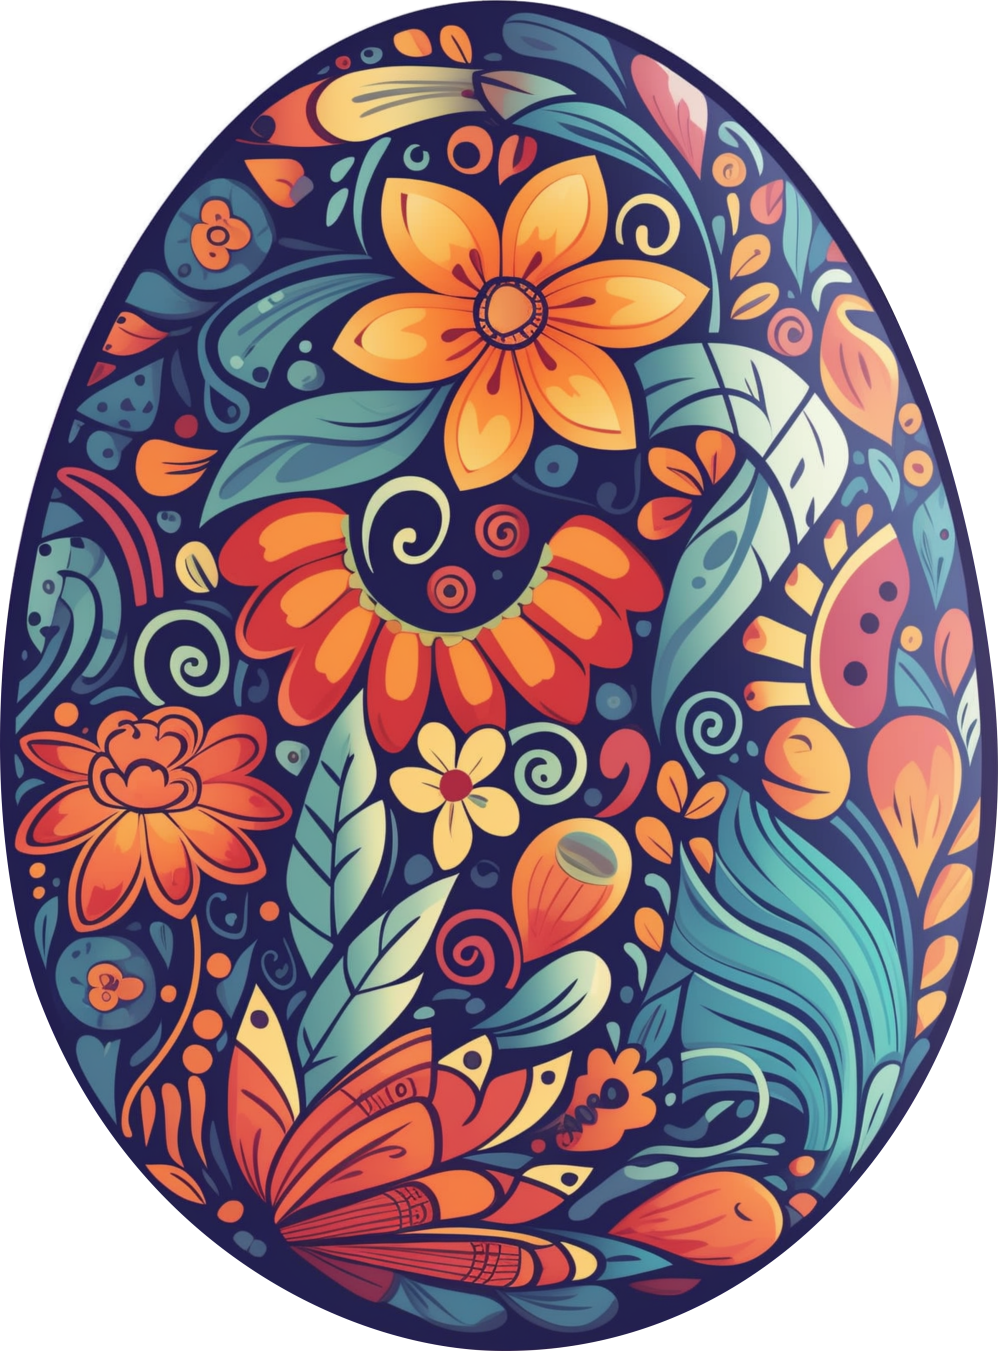 Floral Easter Eggs Bright & Colorful Stickers